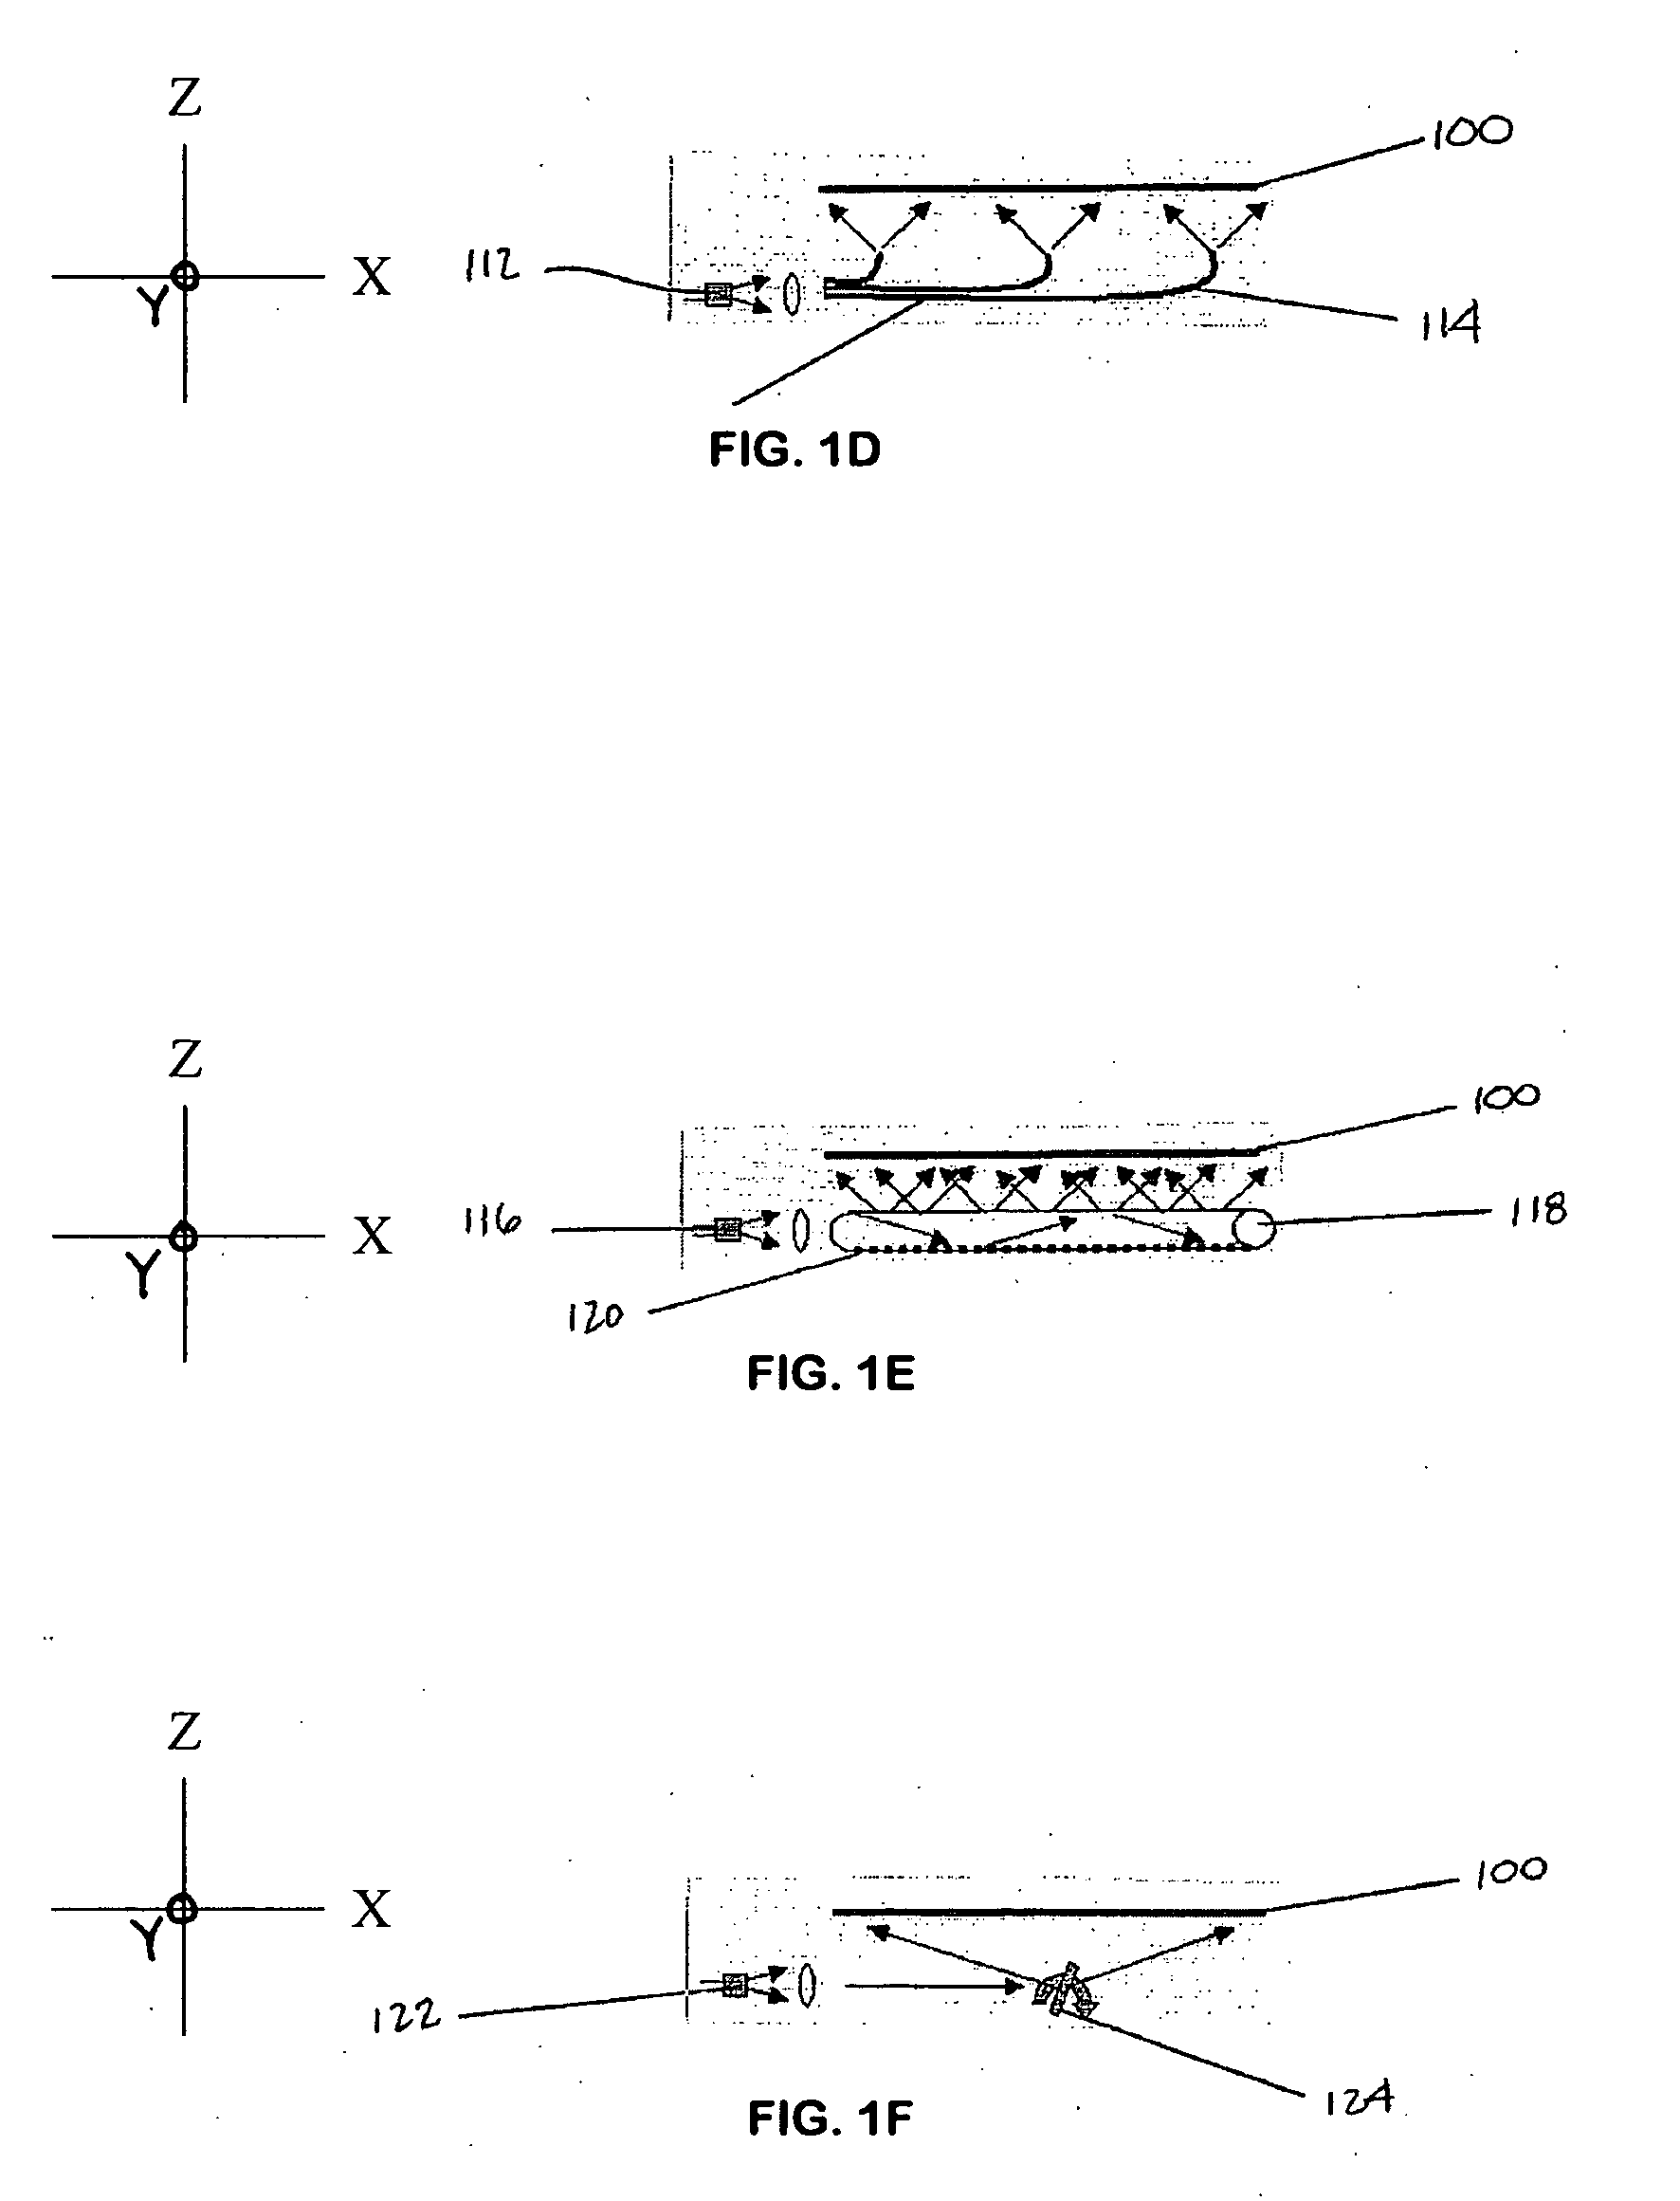 Systems and methods for supplying a distributed light source